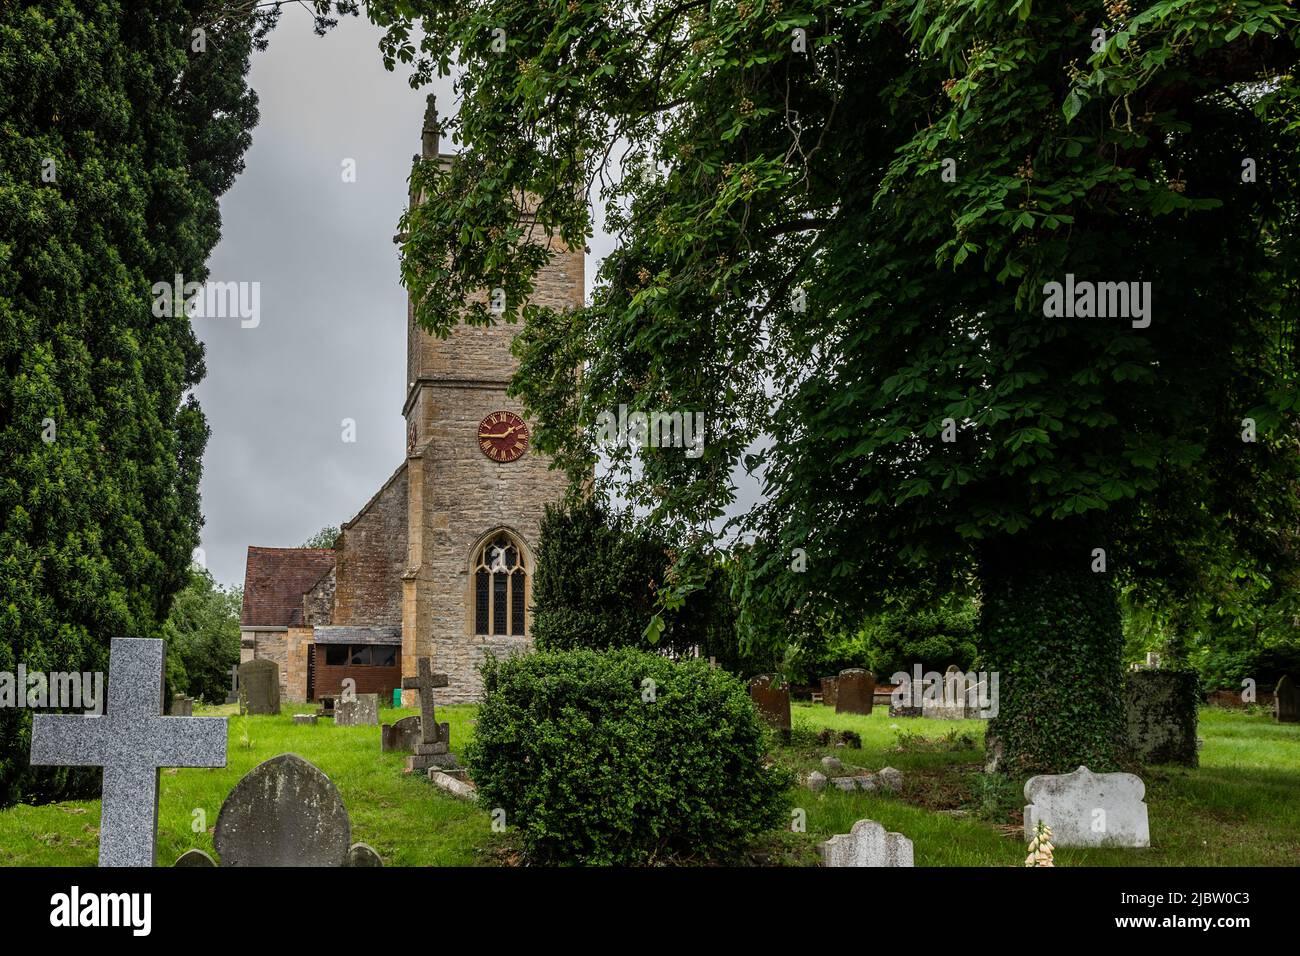 St. Helen's Church in the picturesque village of Clifford Chambers, Warwickshire, UK. Stock Photo